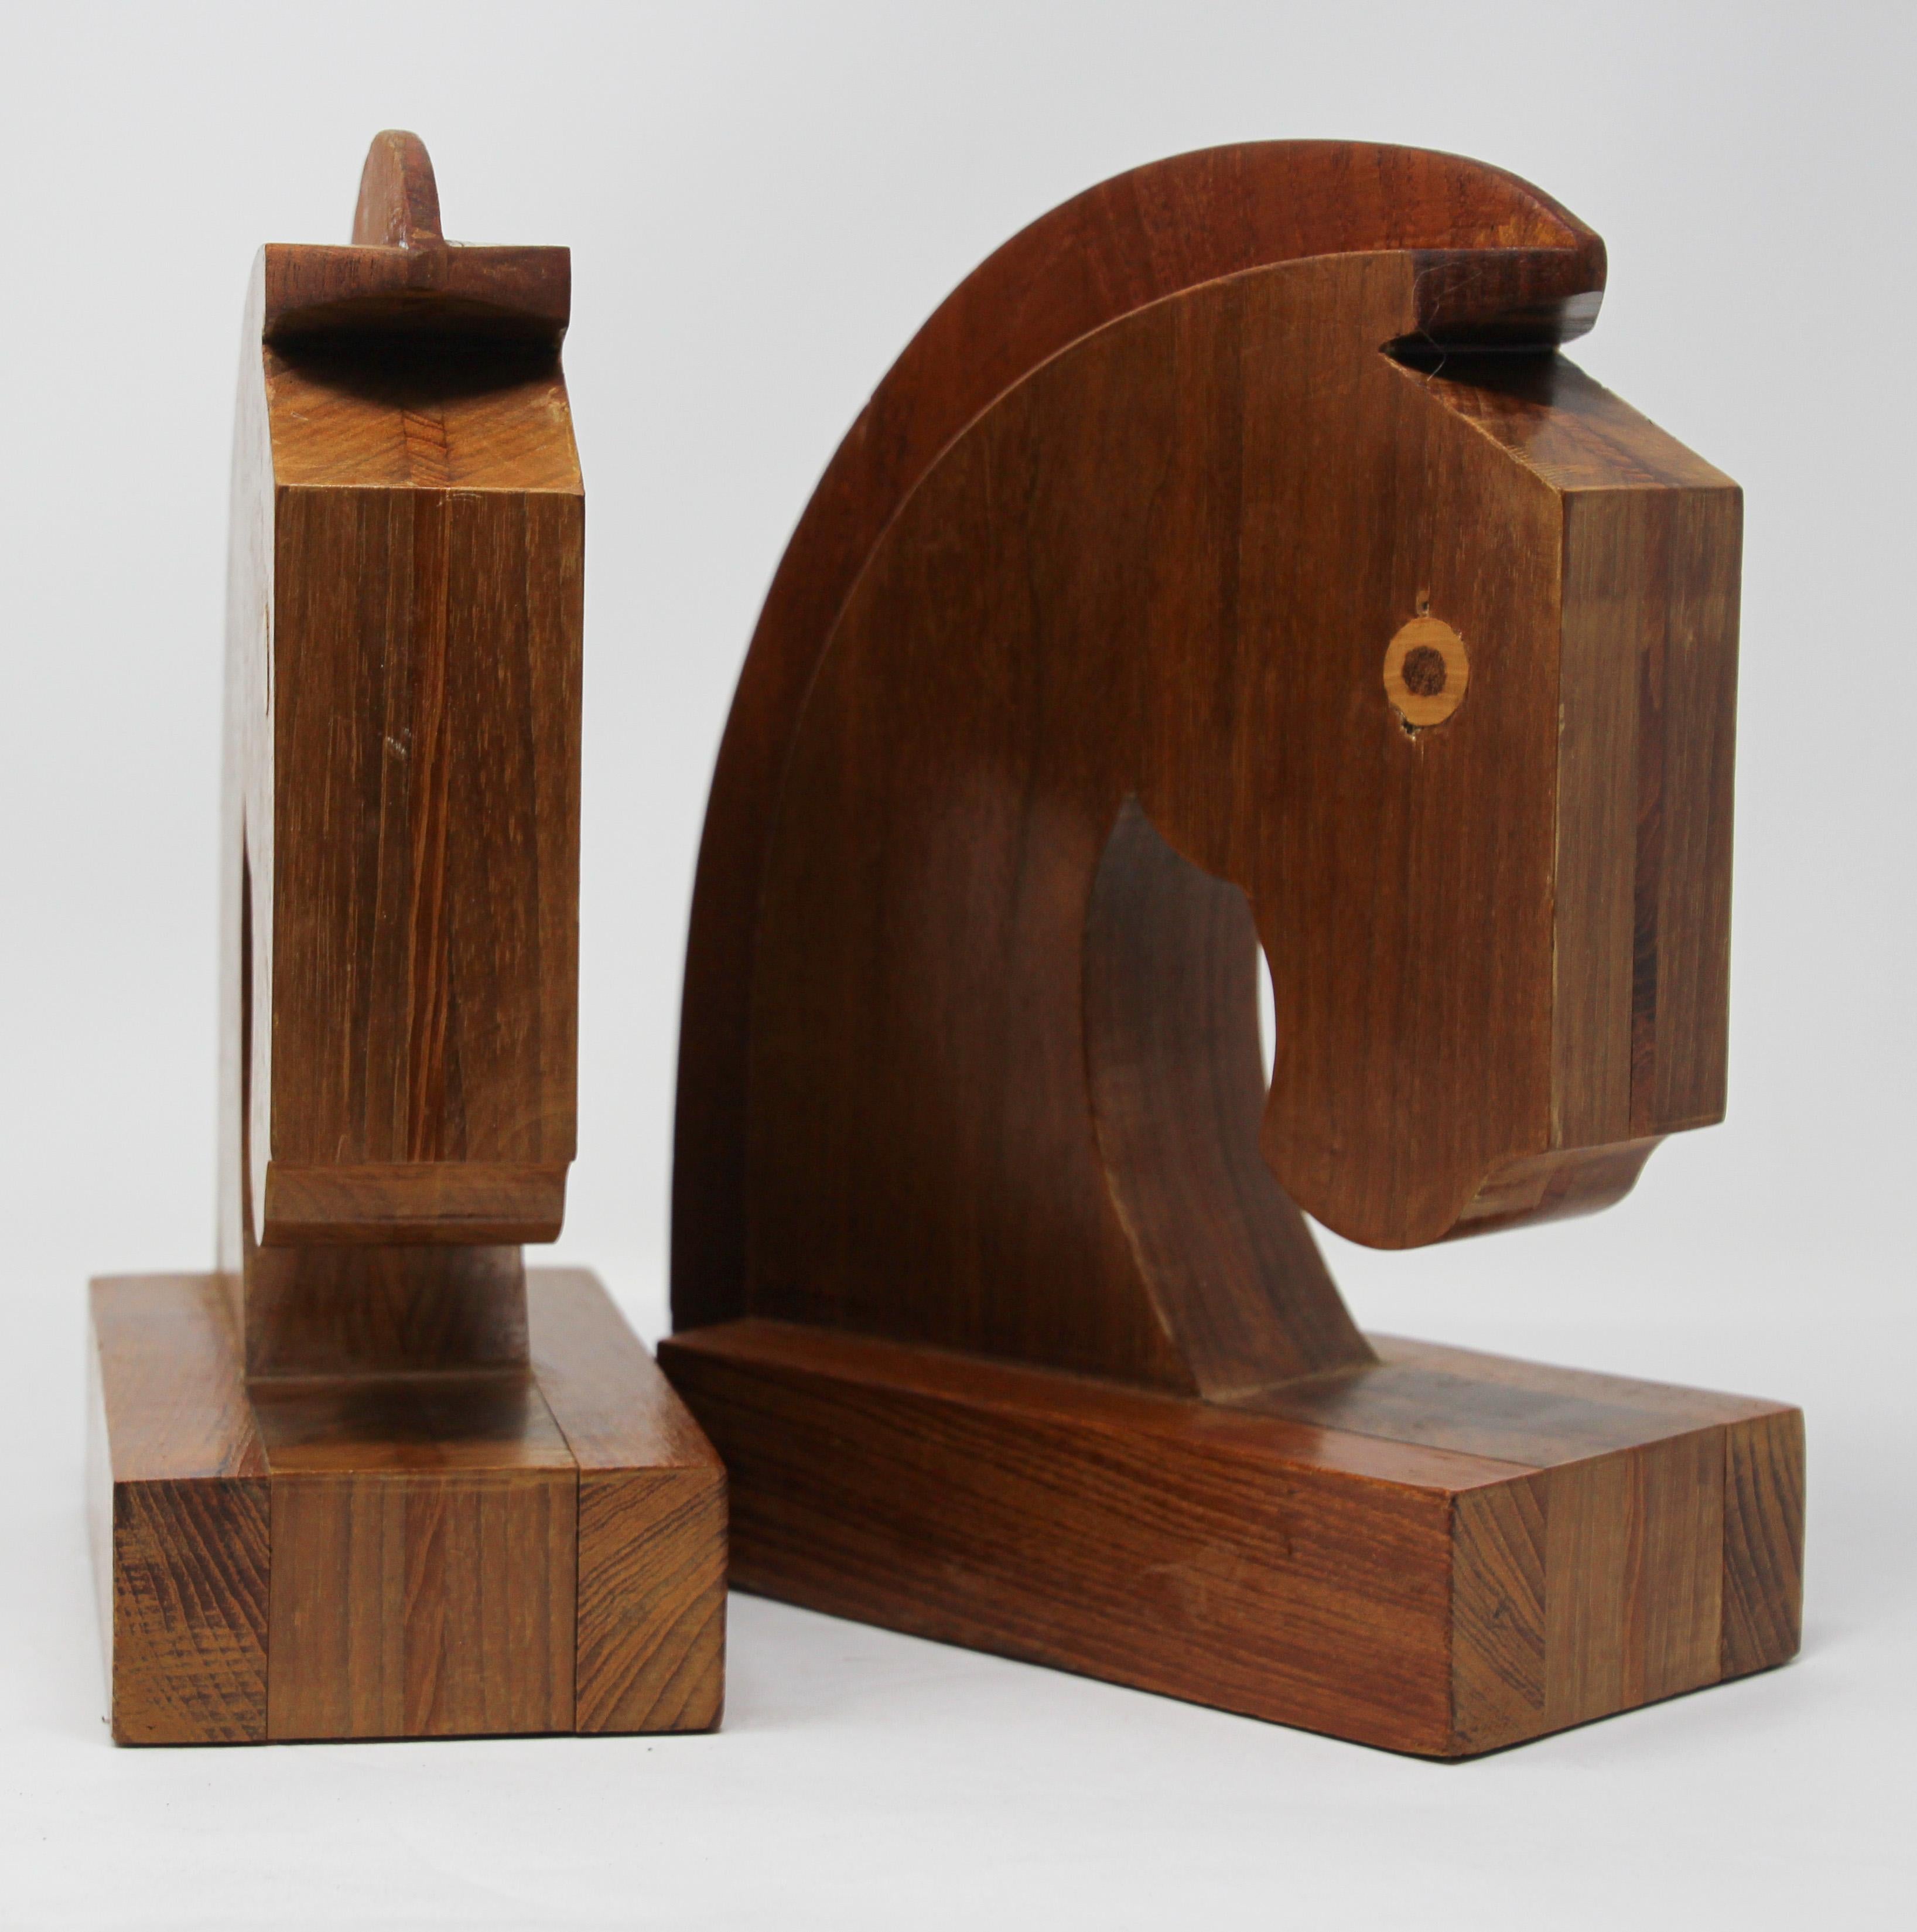 Art Deco Stylized Wood Sculptures of Horse Bust Bookends For Sale 5